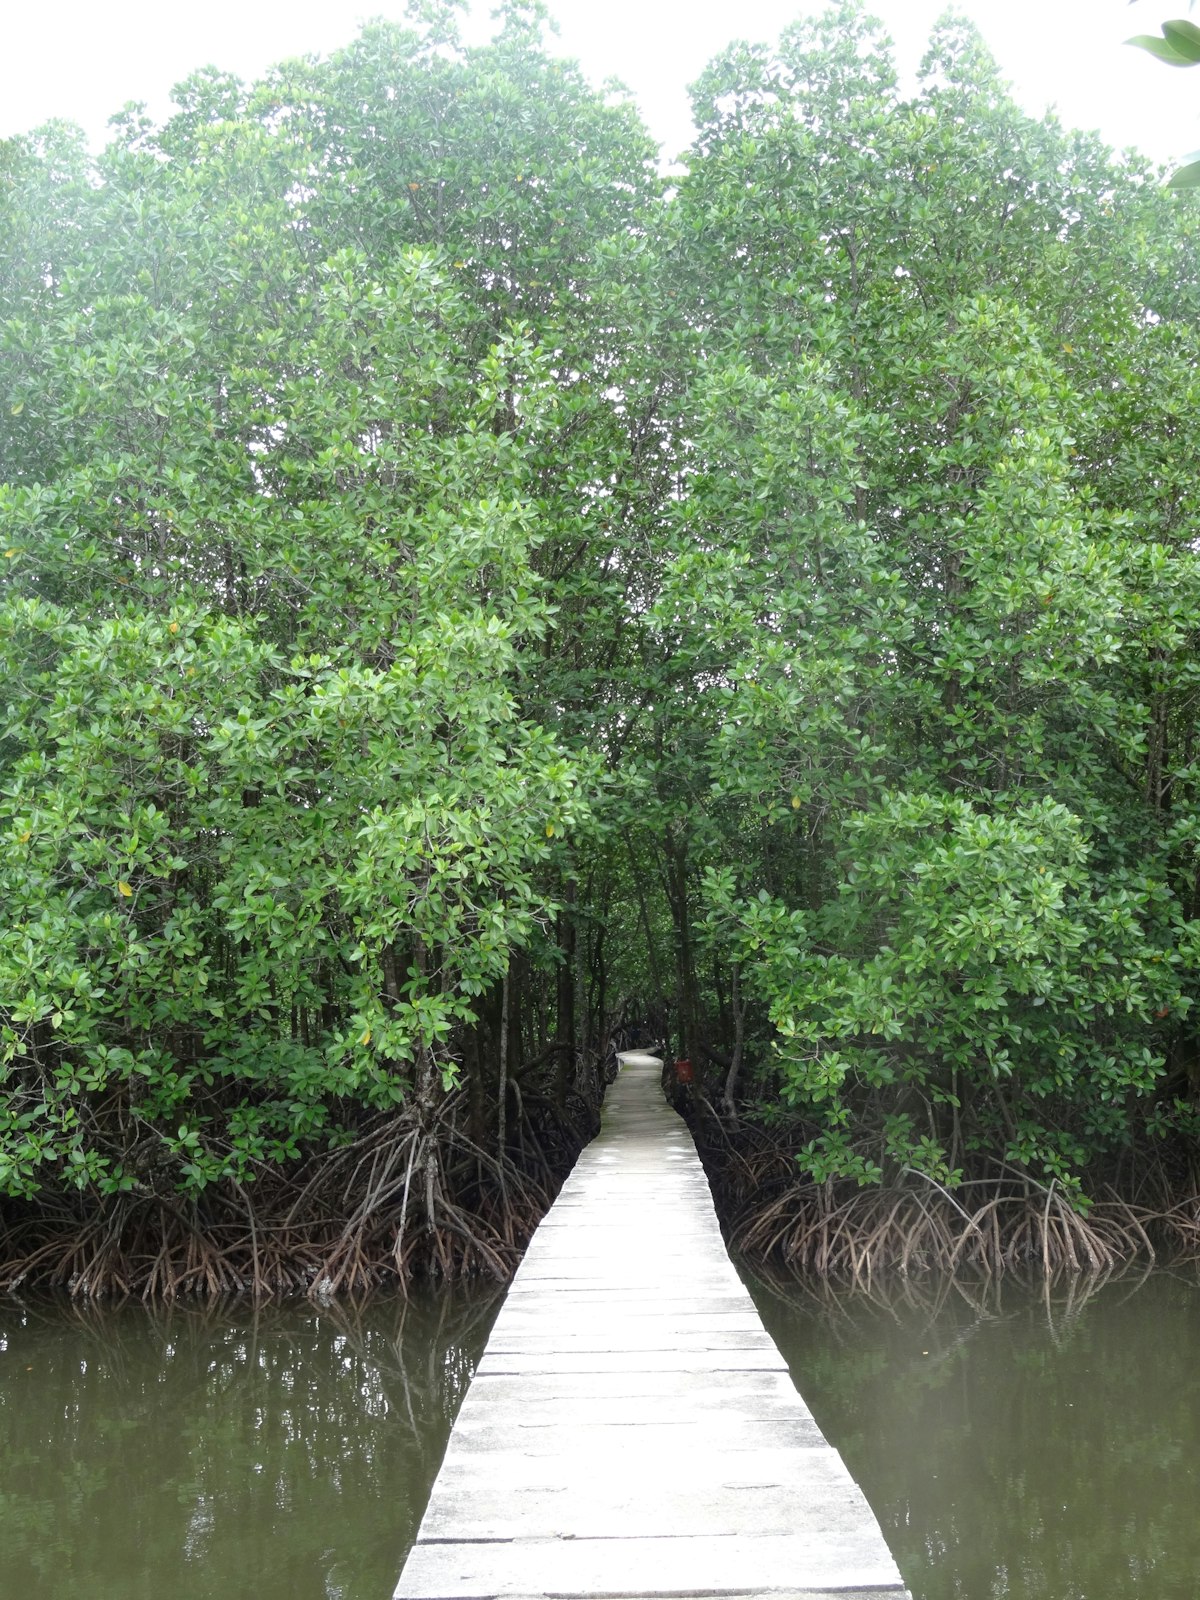 Mangrove forest at the Peam Krasaop Wildlife Sanctuary, Koh Kong, Cambodia.